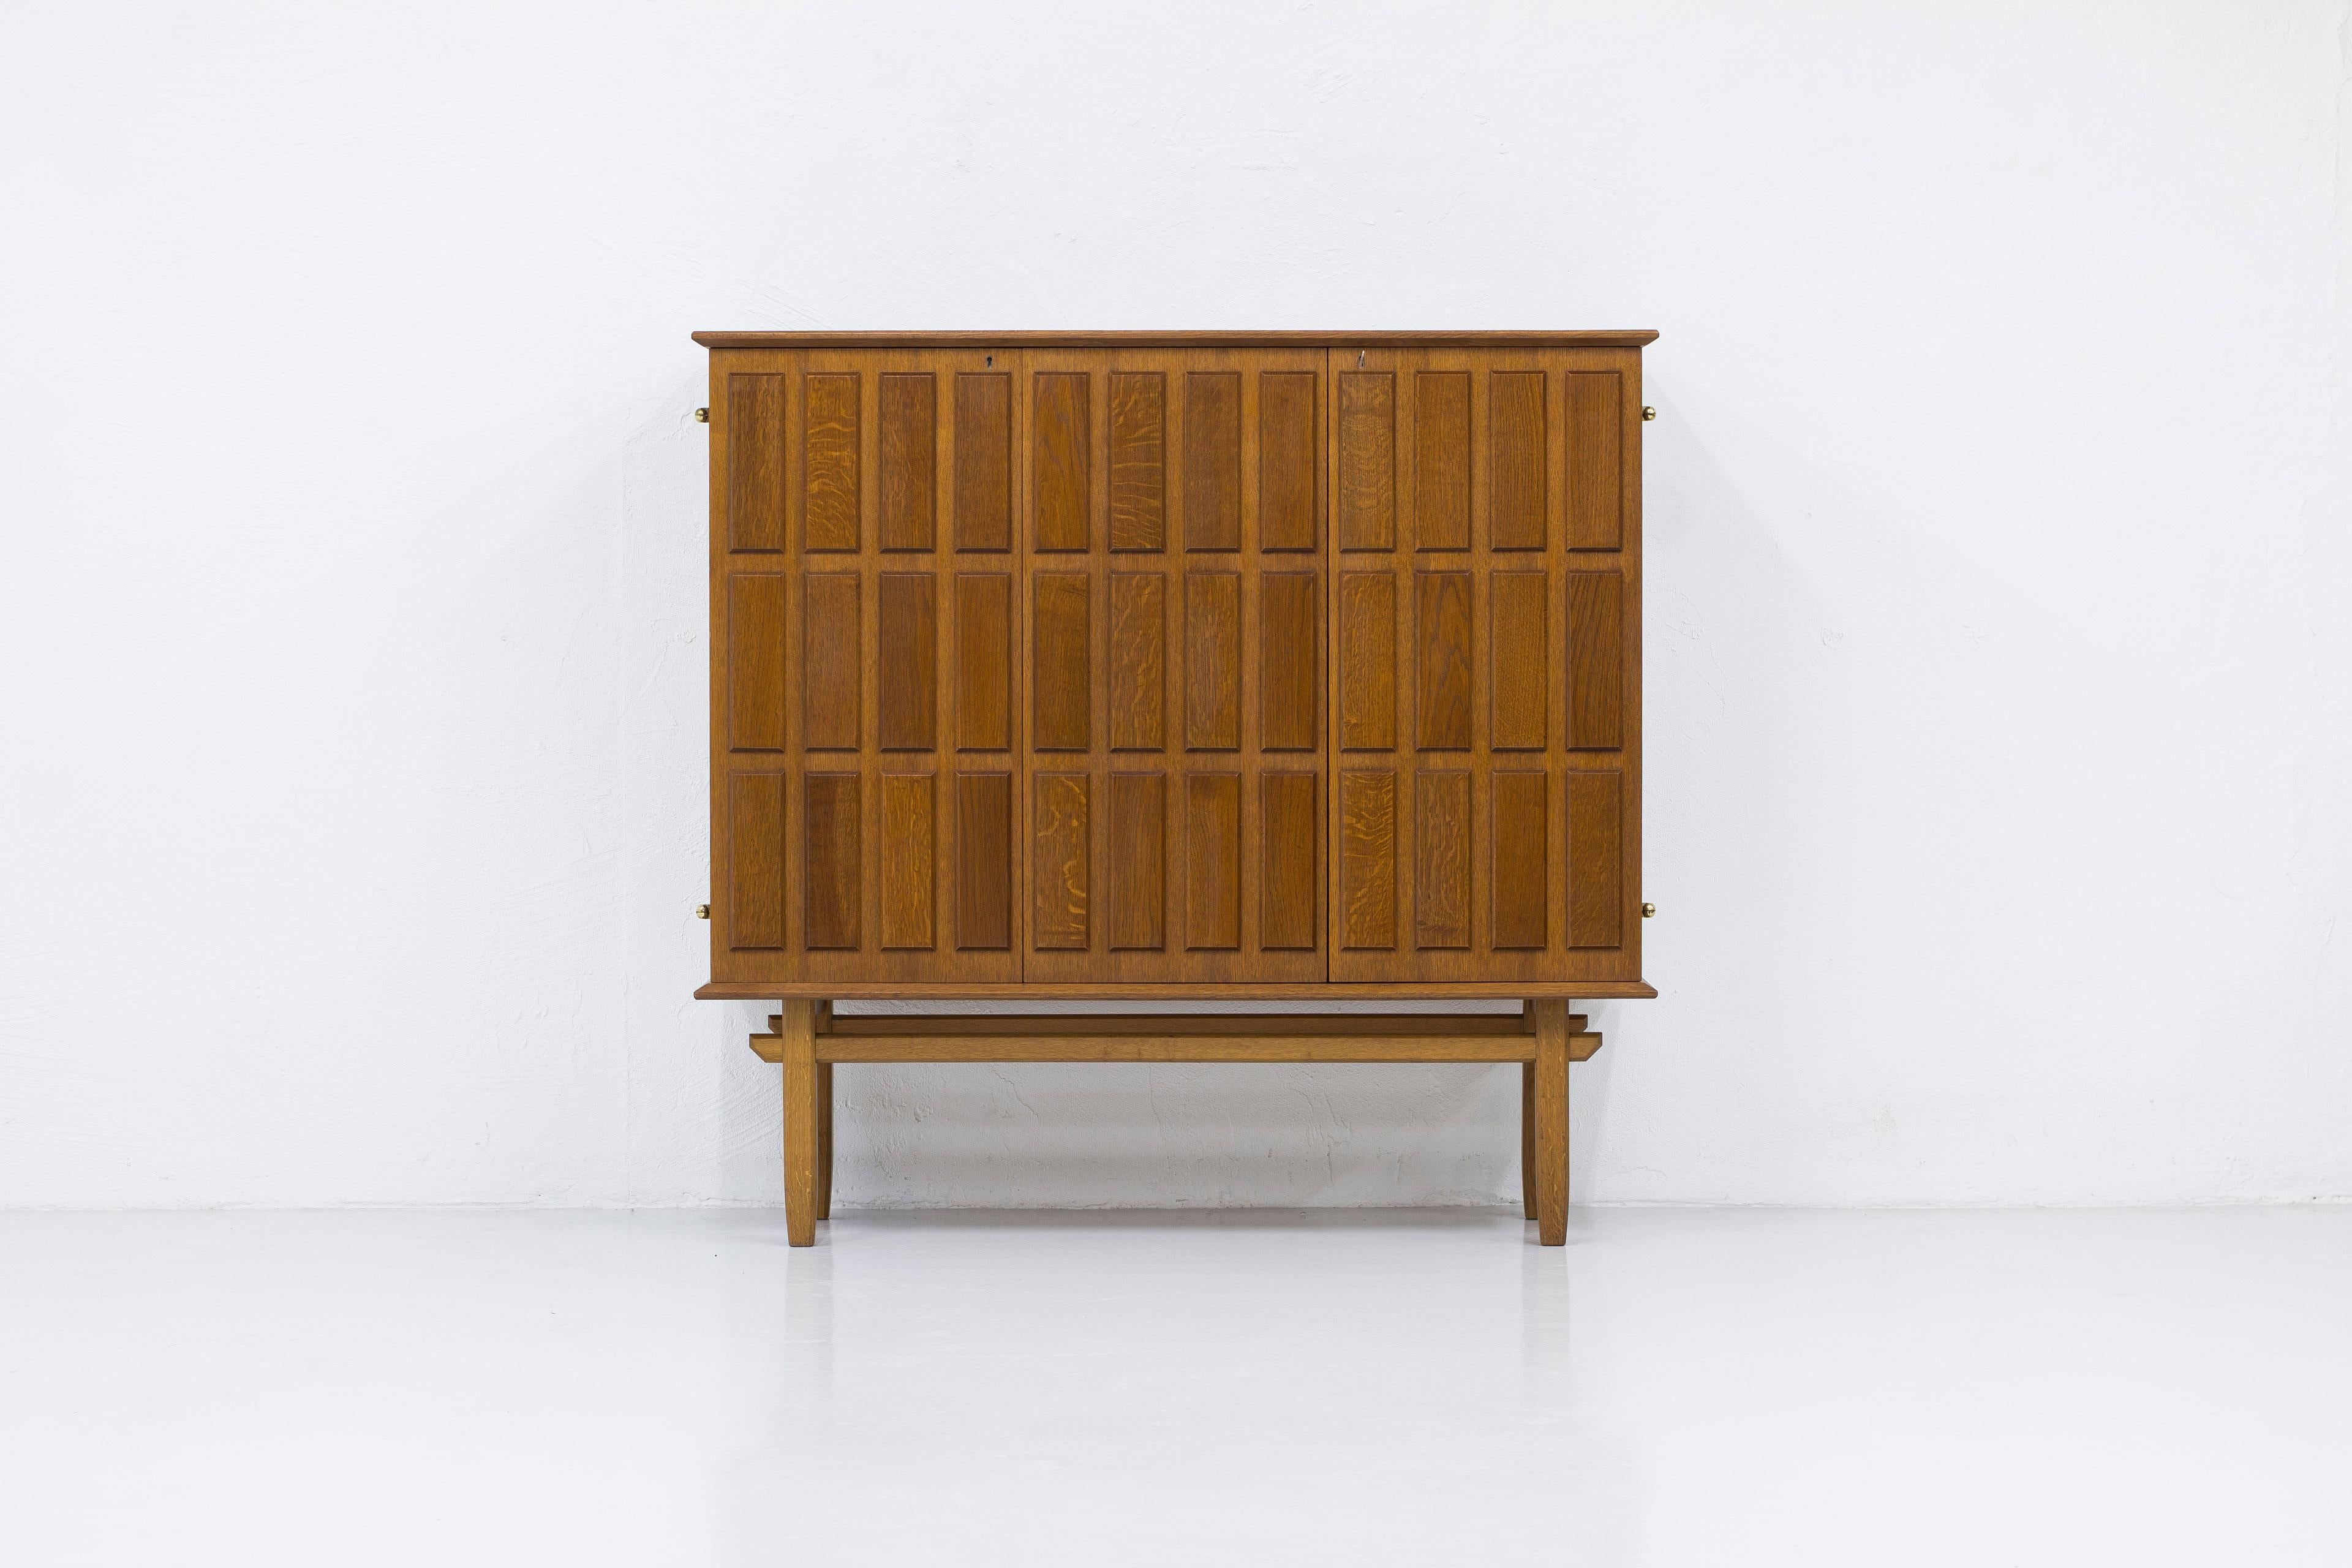 Swedish modern cabinet designed by Eyvind Beckman. Produced in Sweden by his own company during the 1940-50s. Made from oak with inside of Mahogny. Striking geometric relief pattern on the doors. Nice brass hinges and key. Four drawers with green